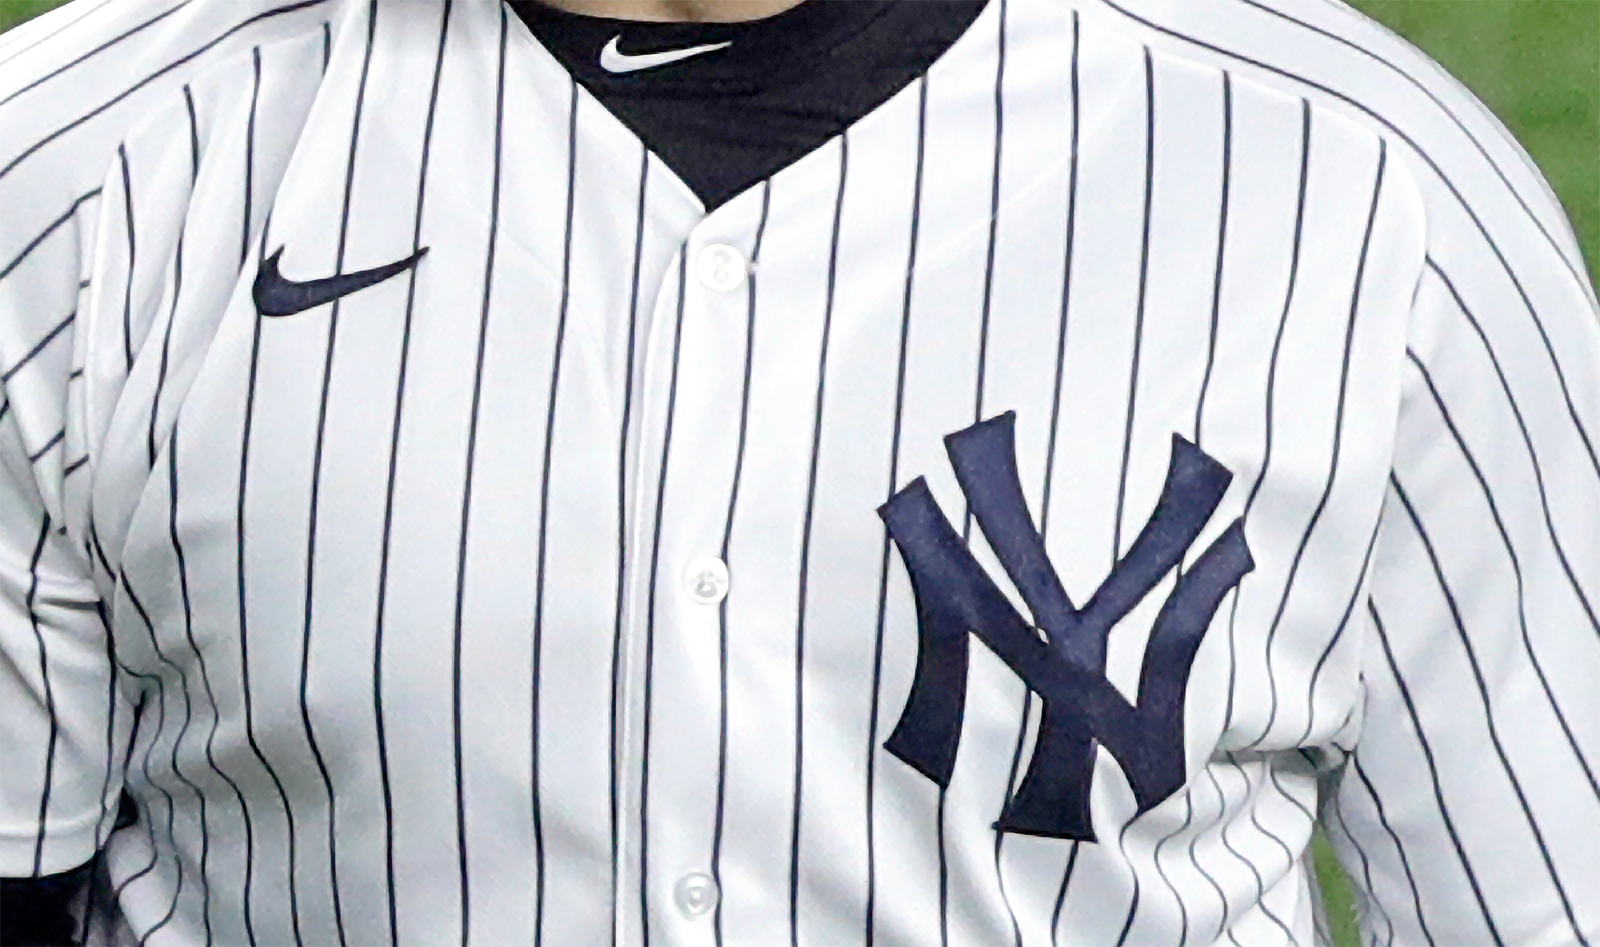 Yankees add advertising patch to uniforms